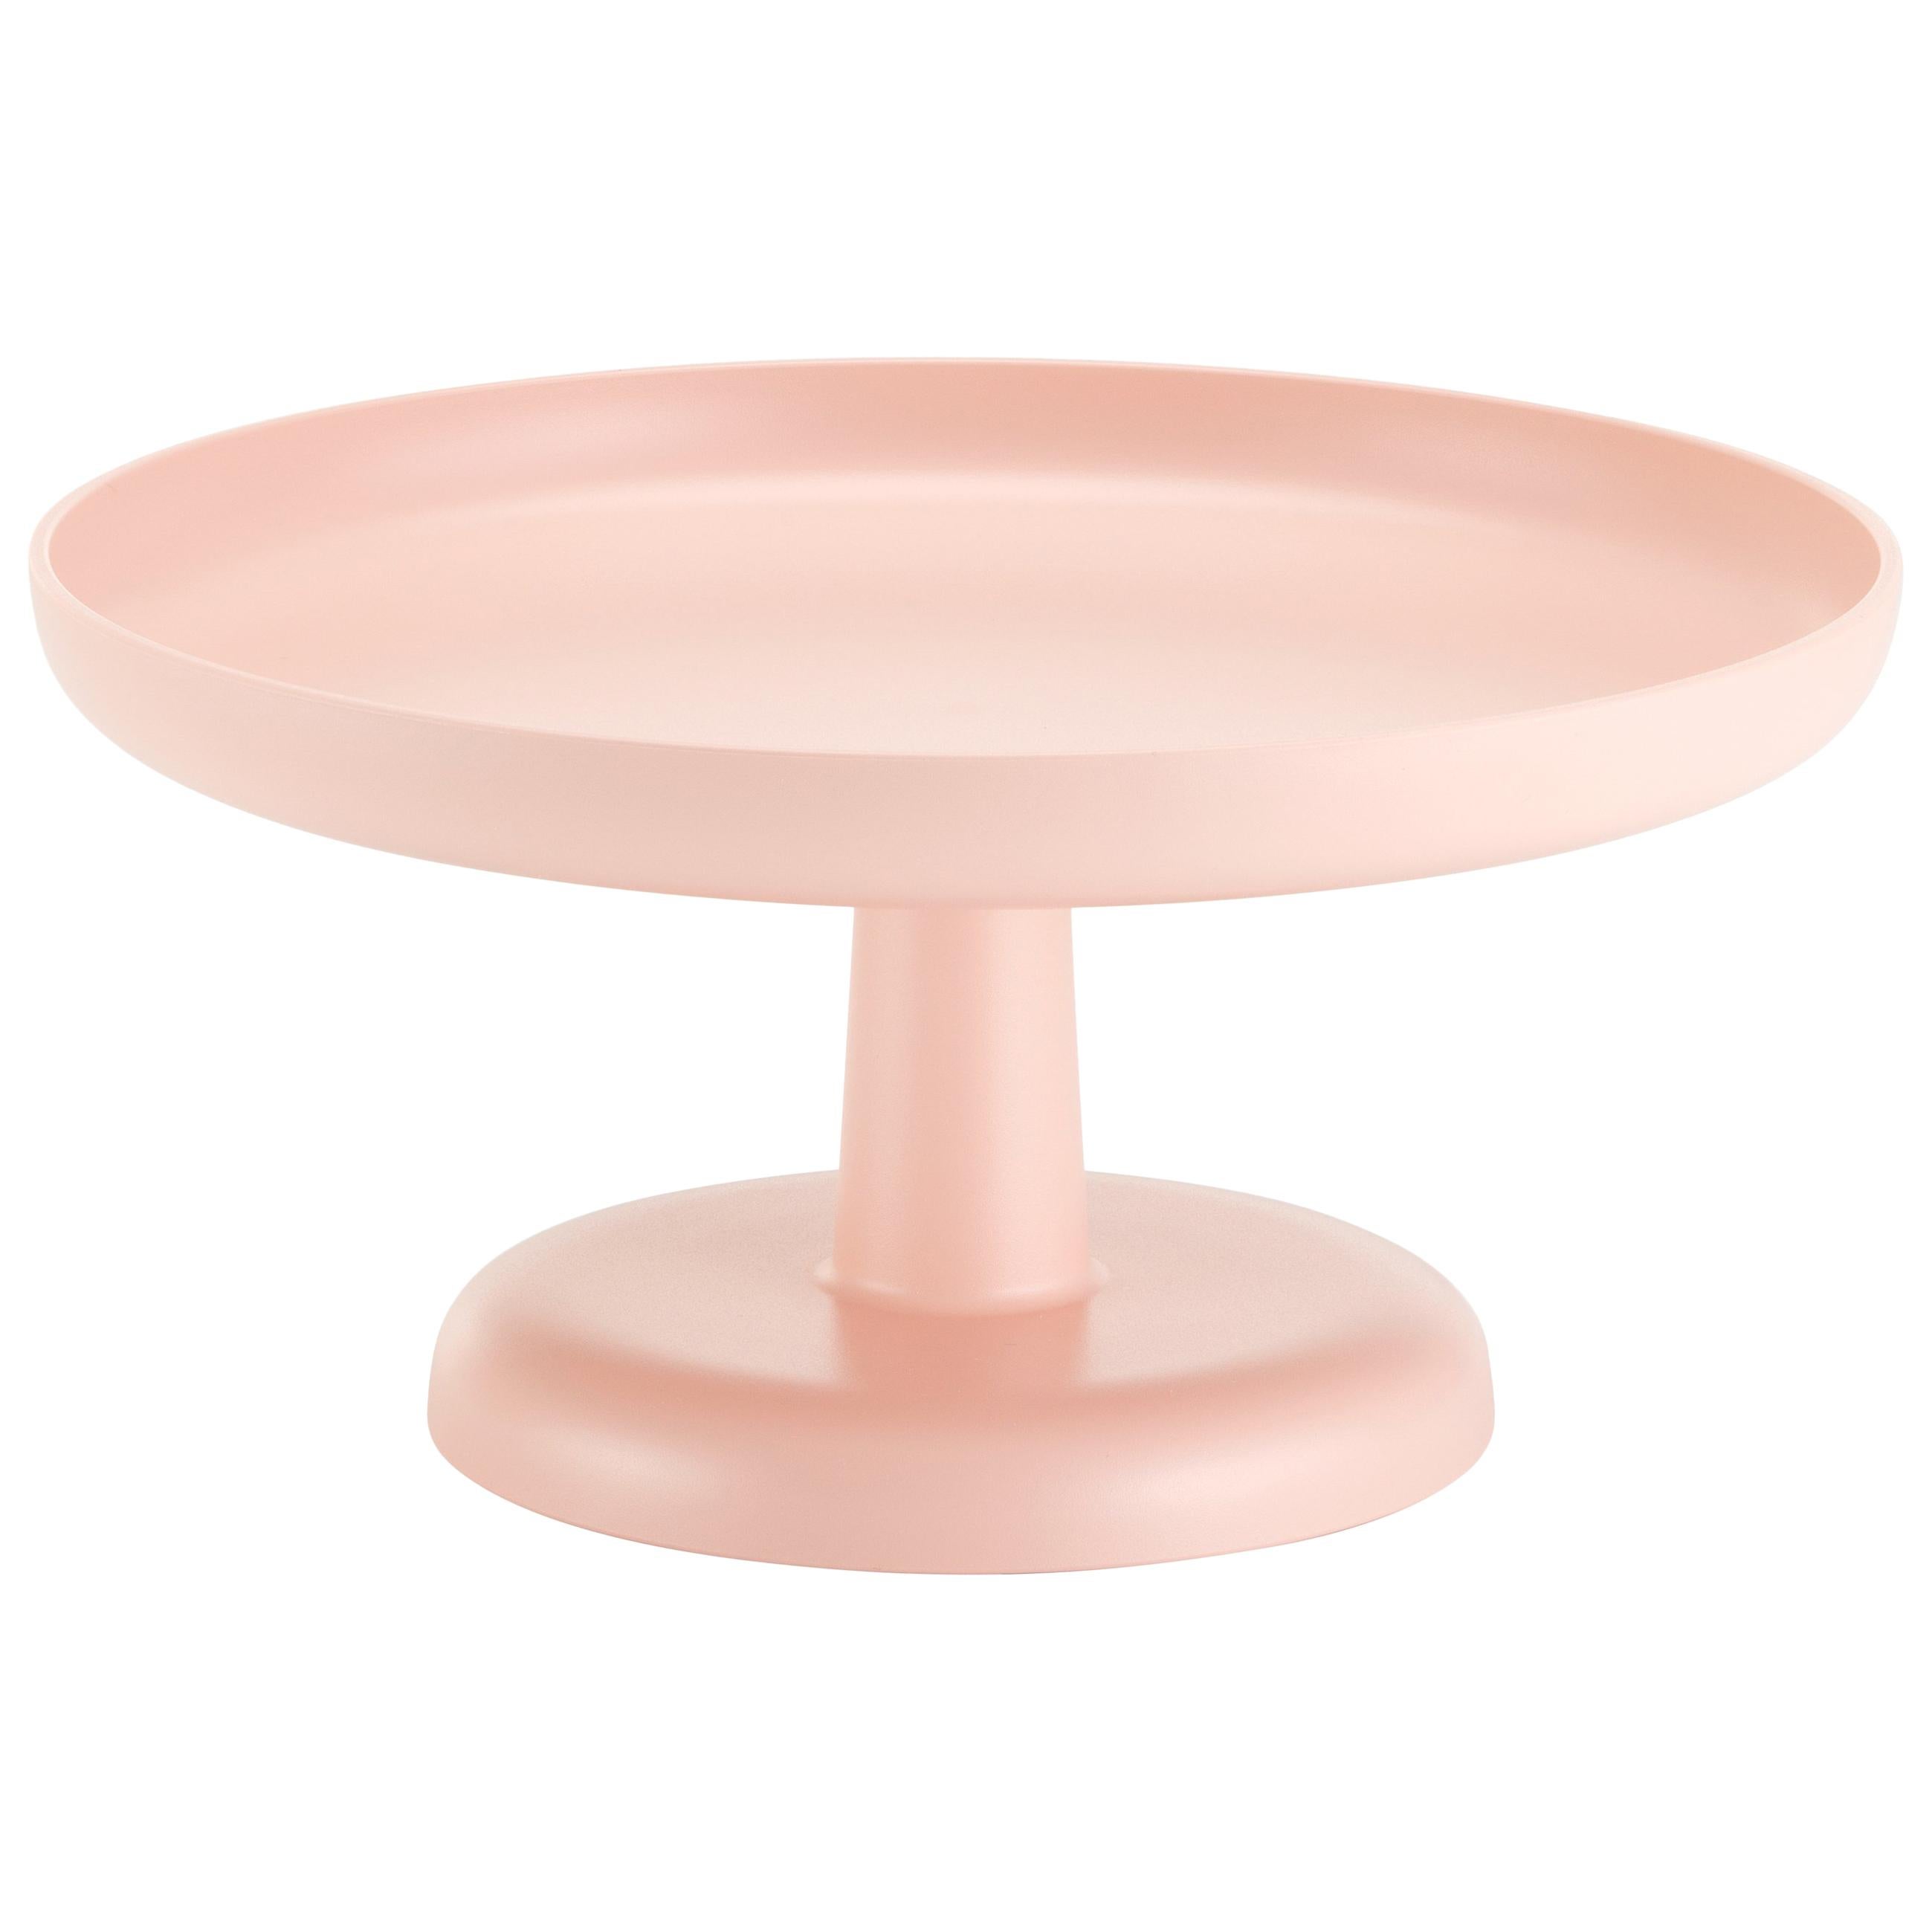 Vitra High Tray in Pale Rose by Jasper Morrison For Sale